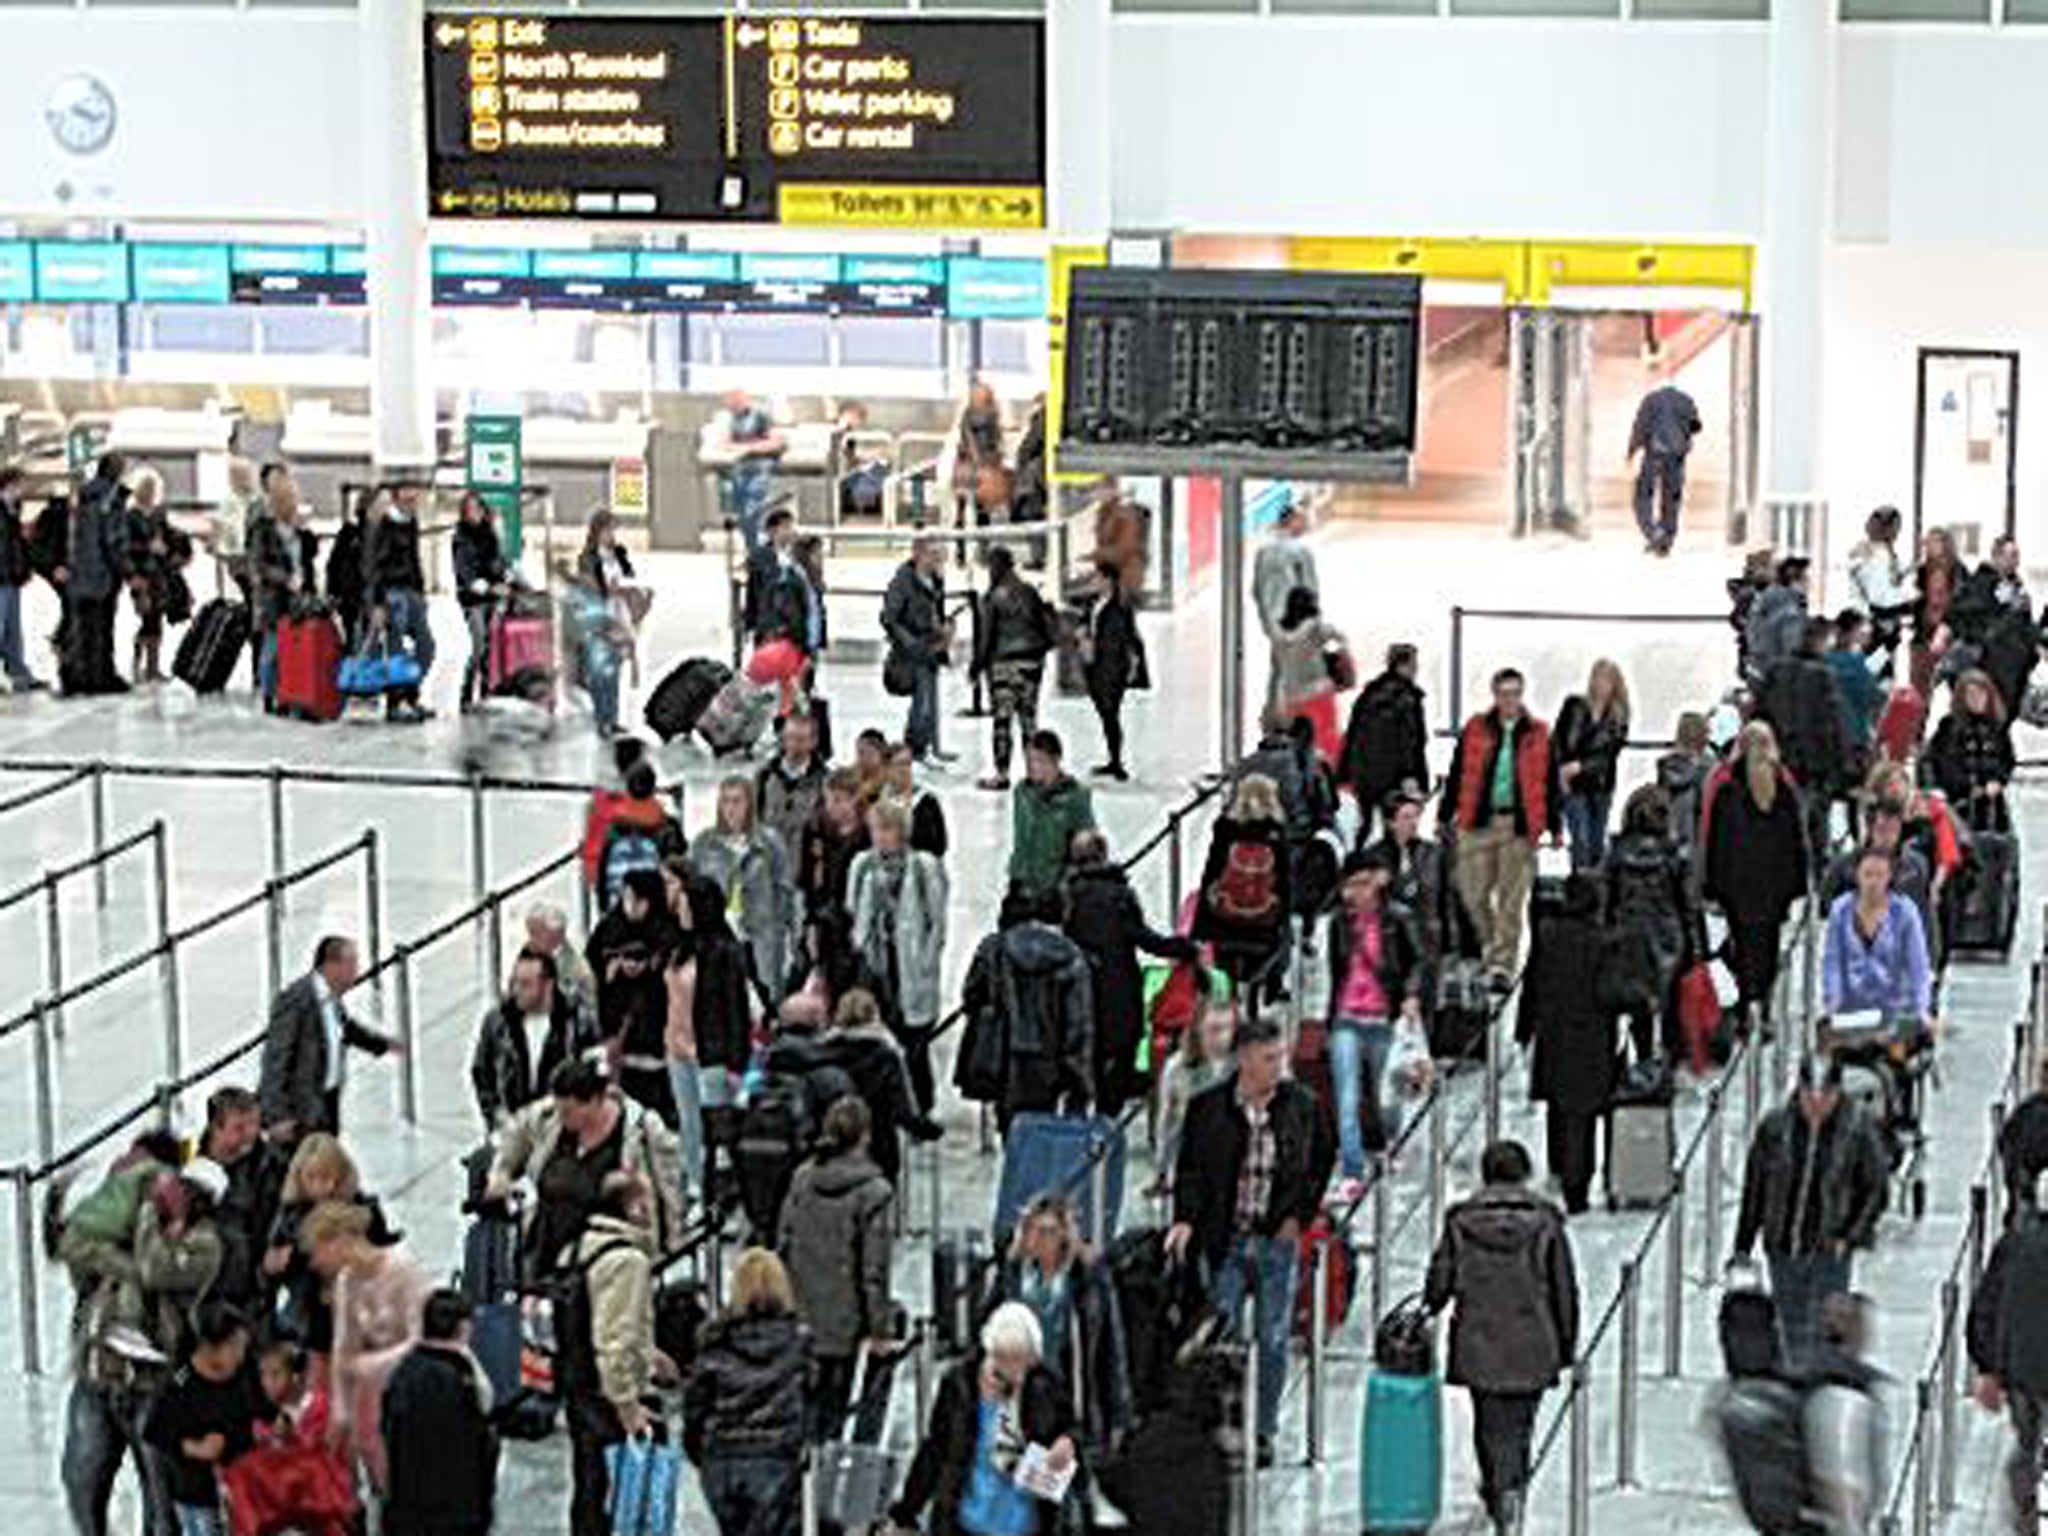 Uneasy situation: passengers stranded at Gatwick this week